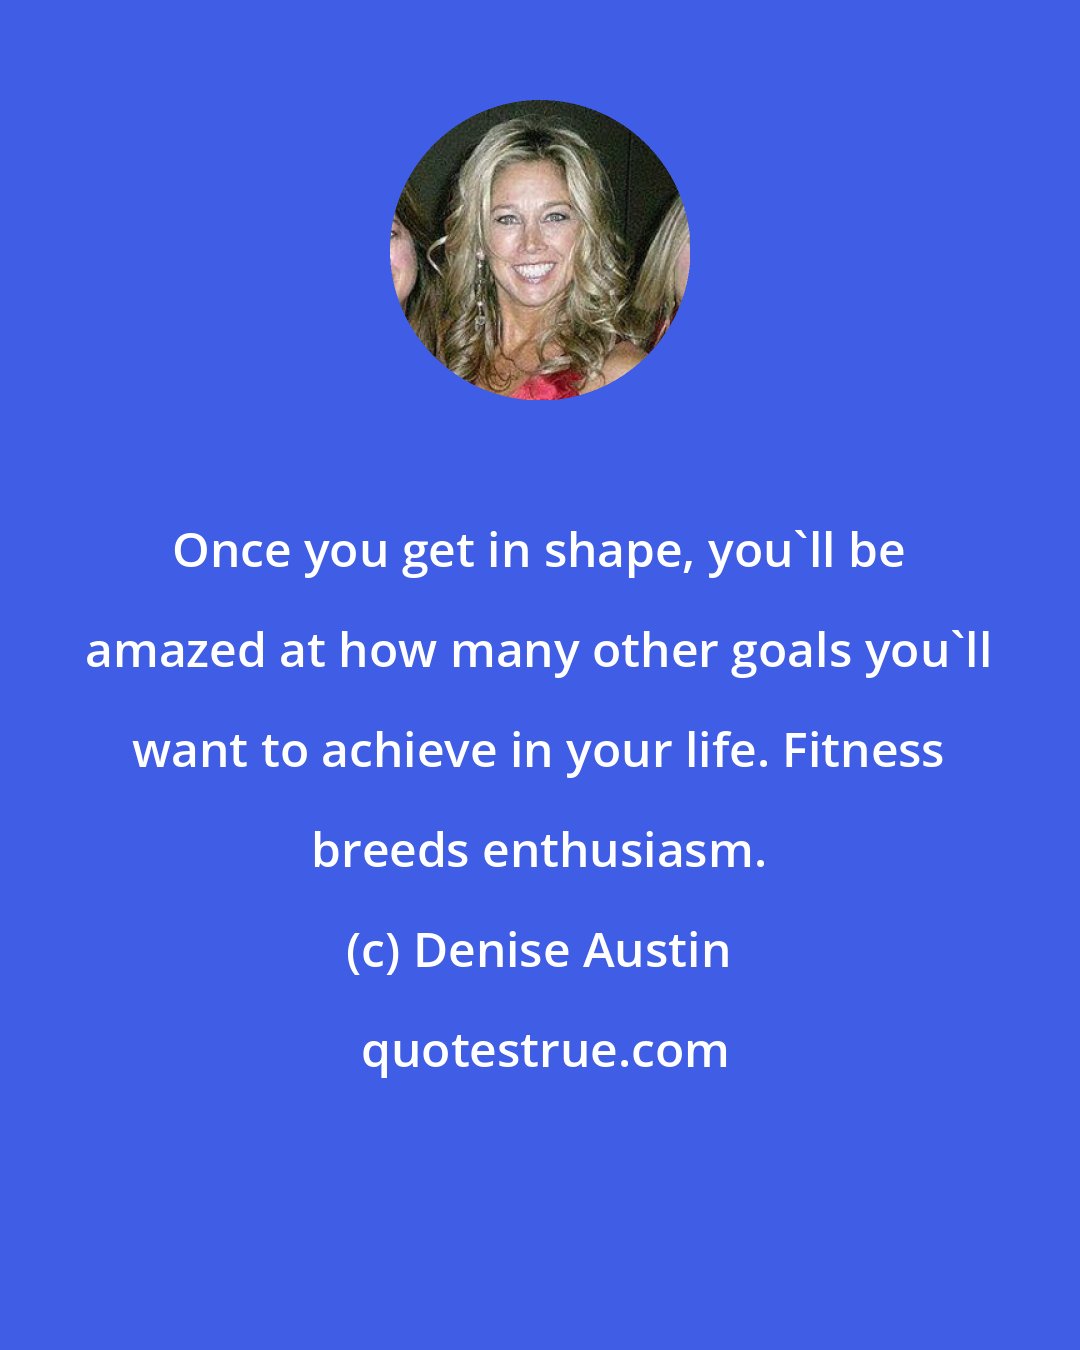 Denise Austin: Once you get in shape, you'll be amazed at how many other goals you'll want to achieve in your life. Fitness breeds enthusiasm.